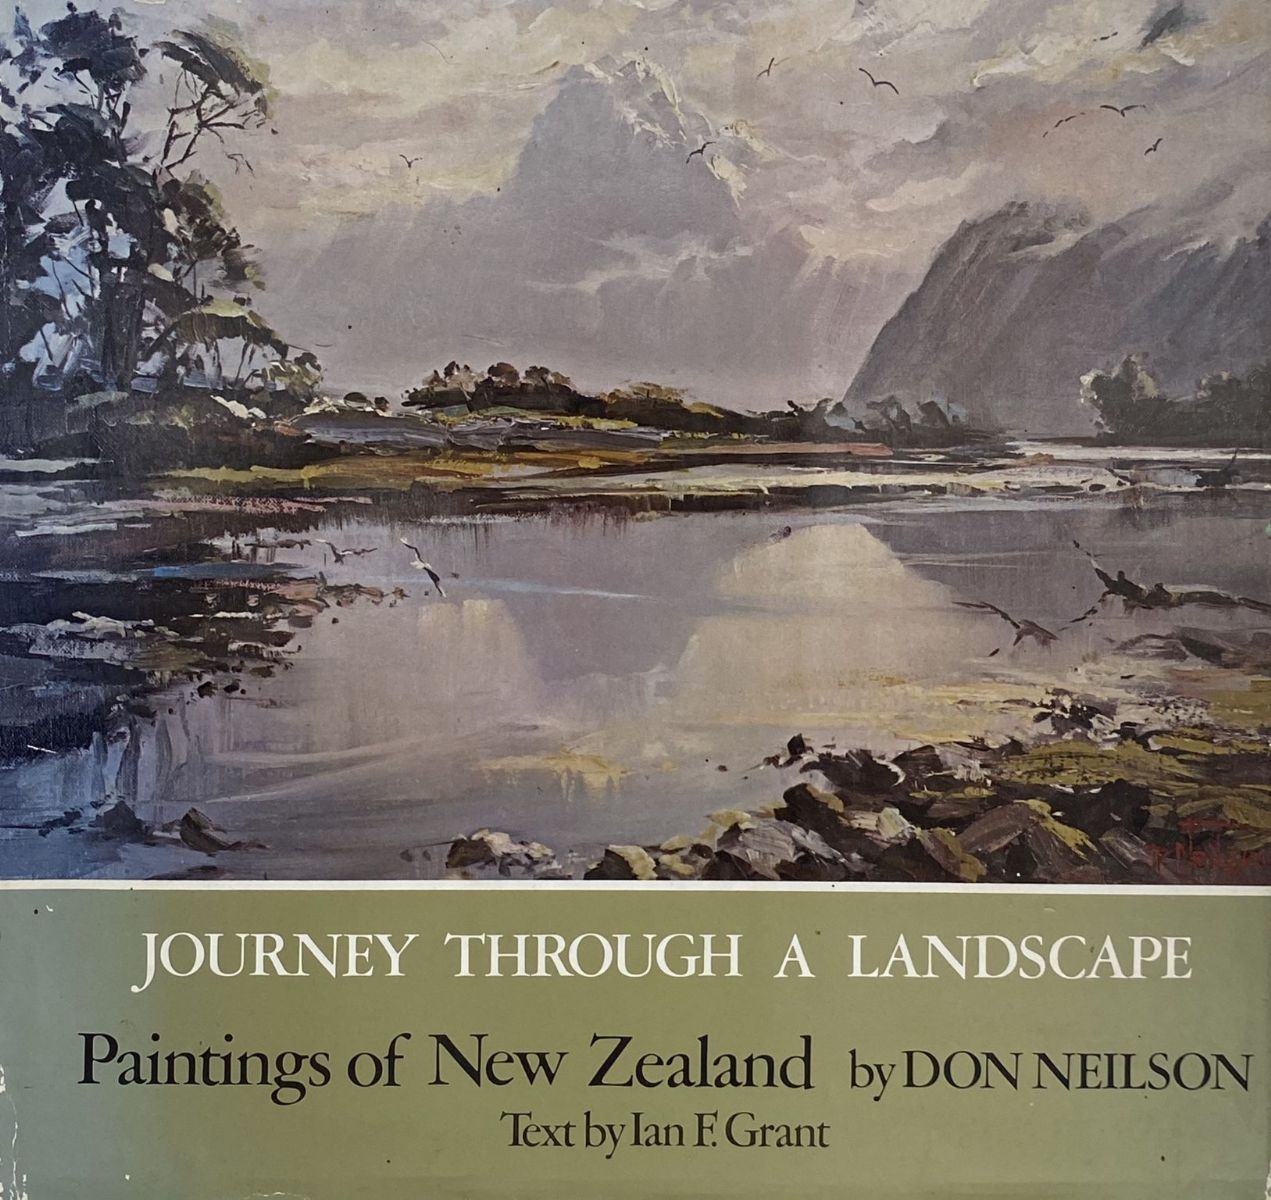 JOURNEY THROUGH A LANDSCAPE: Paintings of New Zealand